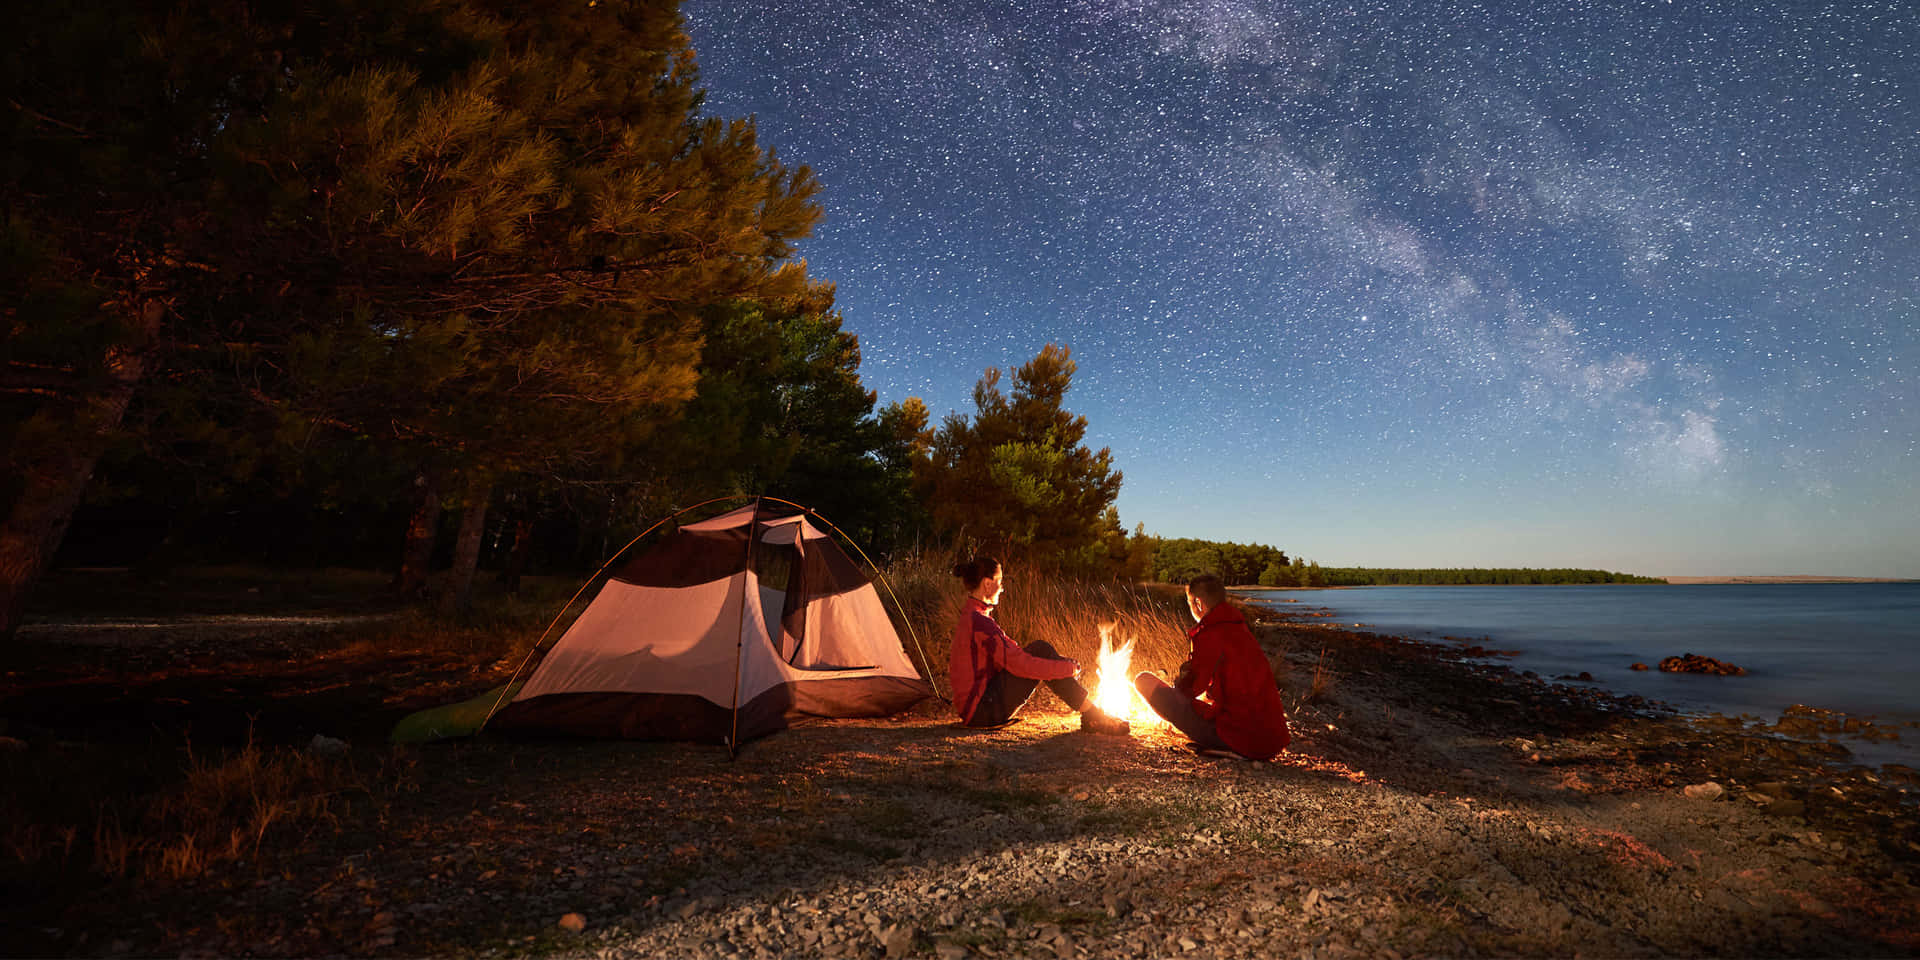 Enjoy the beauty of nature by going camping!